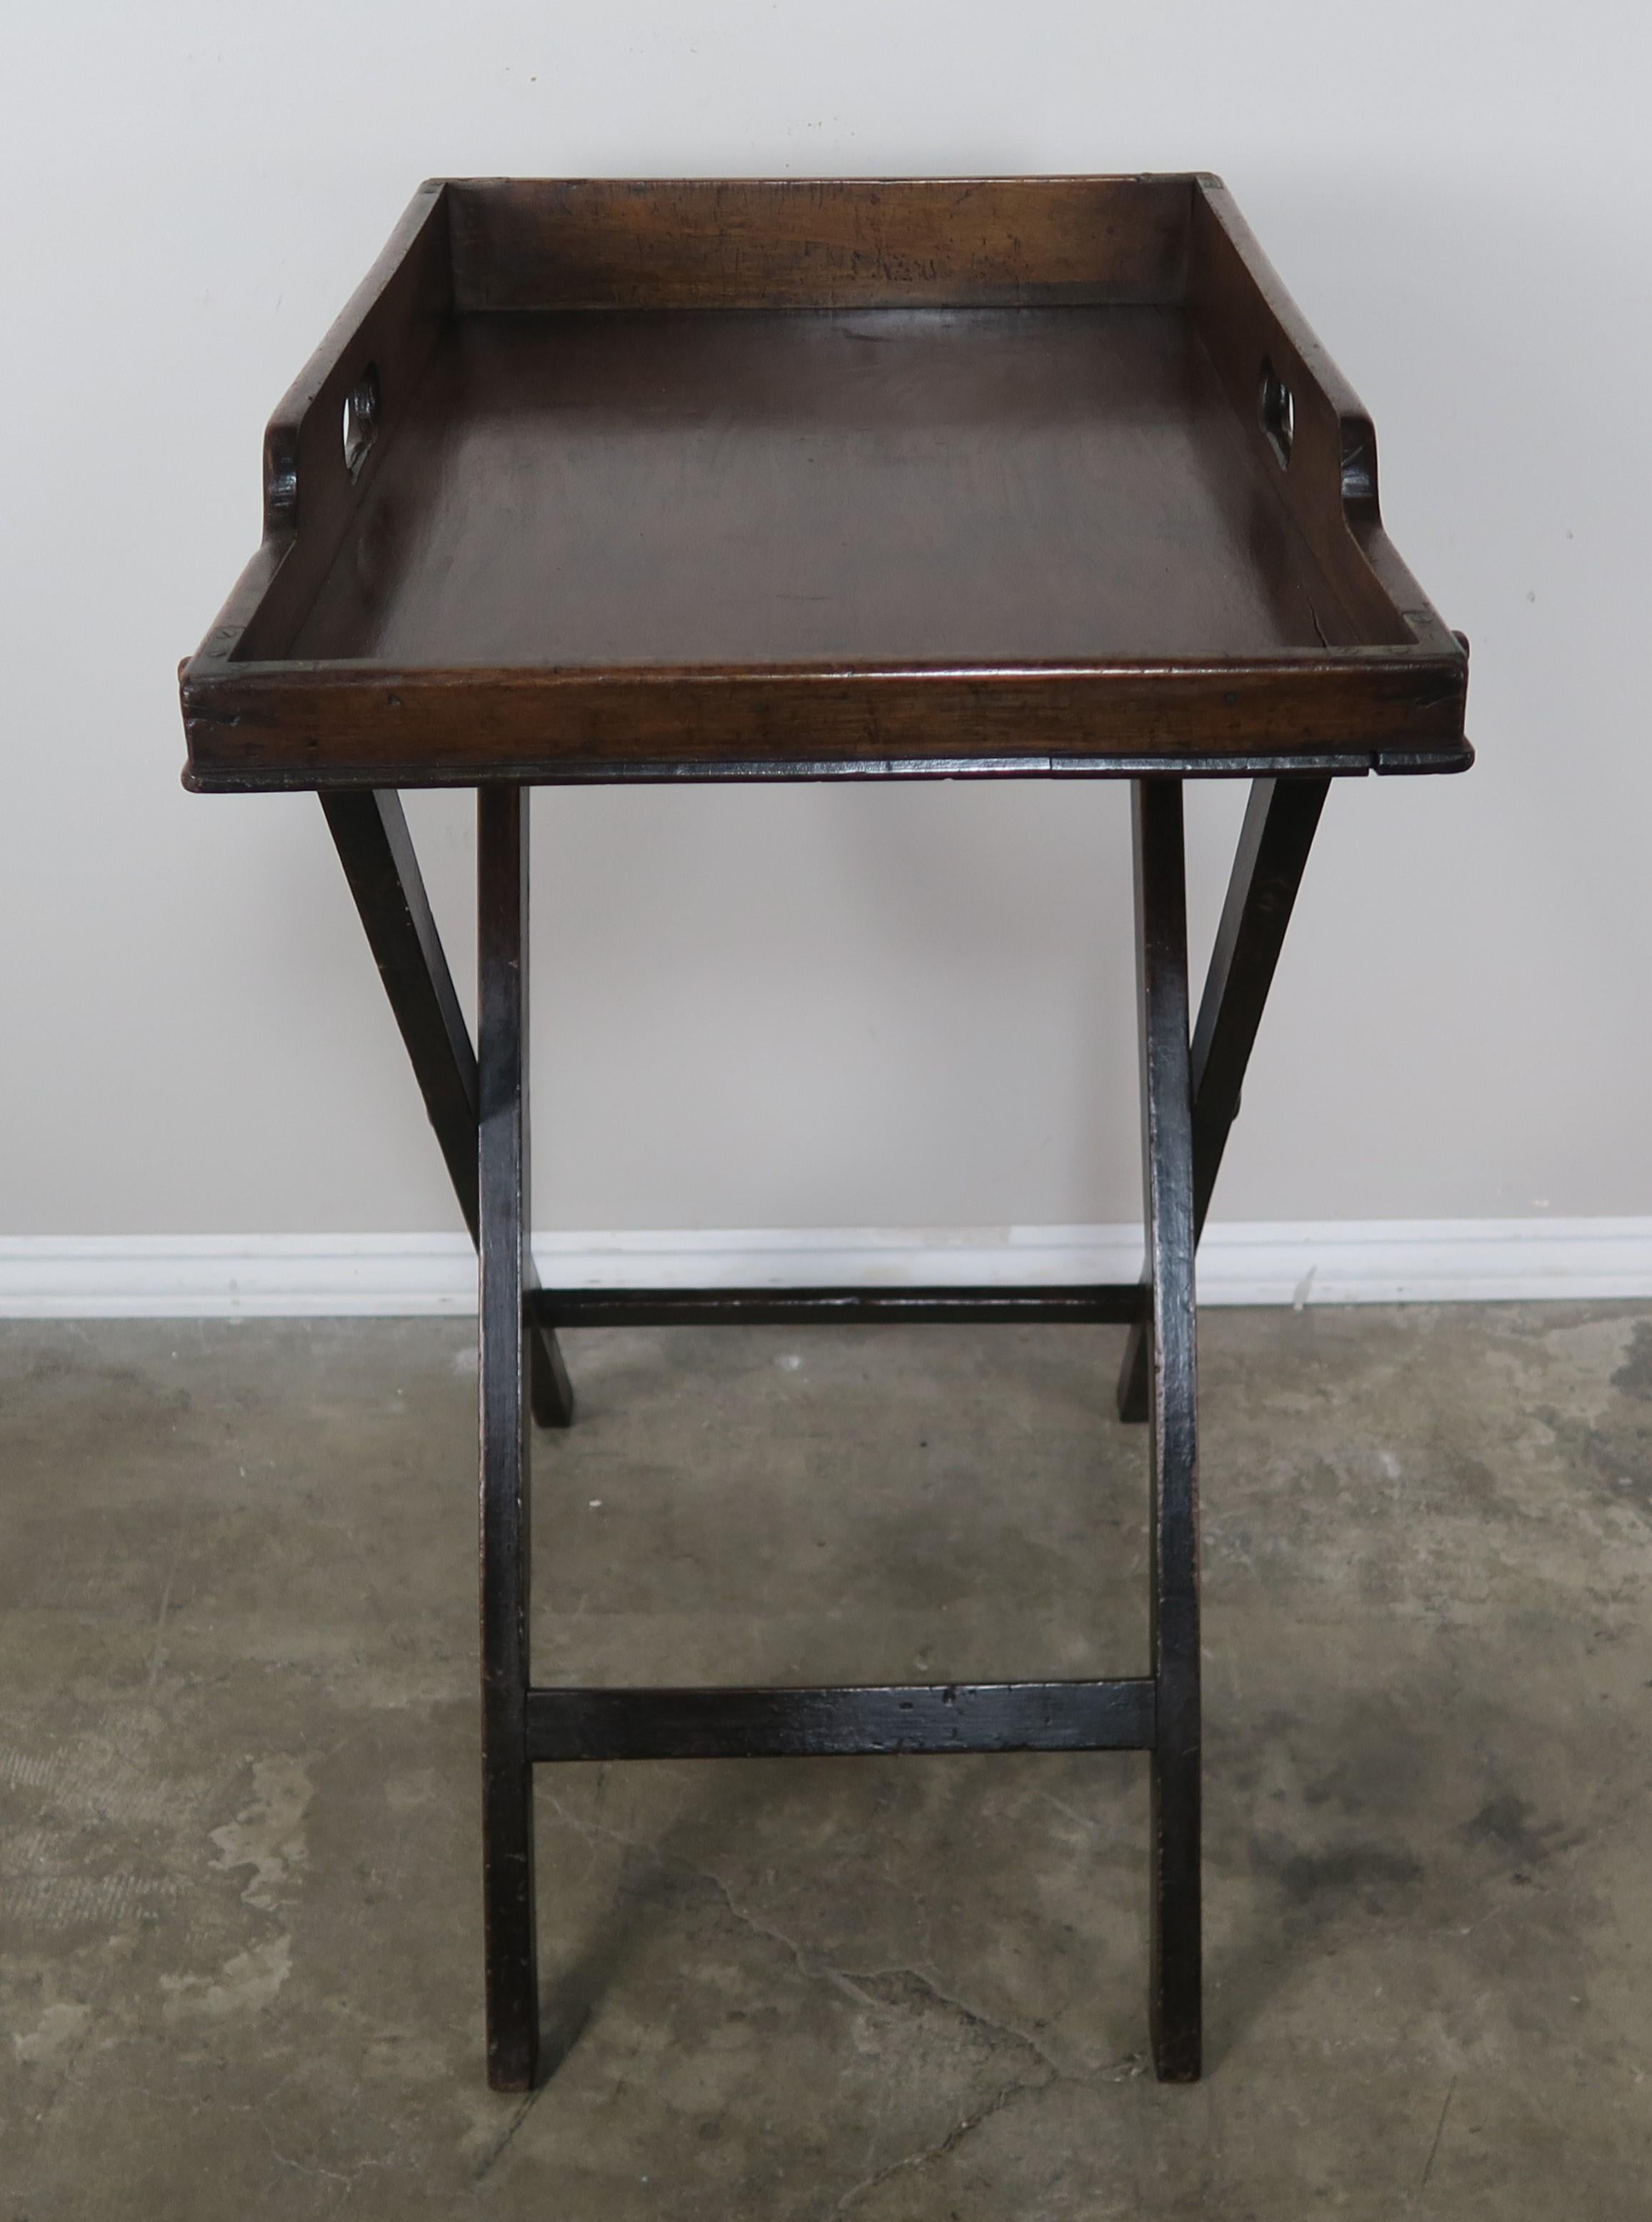 English Mahogany Butler's Tray with Stand, circa 1900s (Sonstiges)